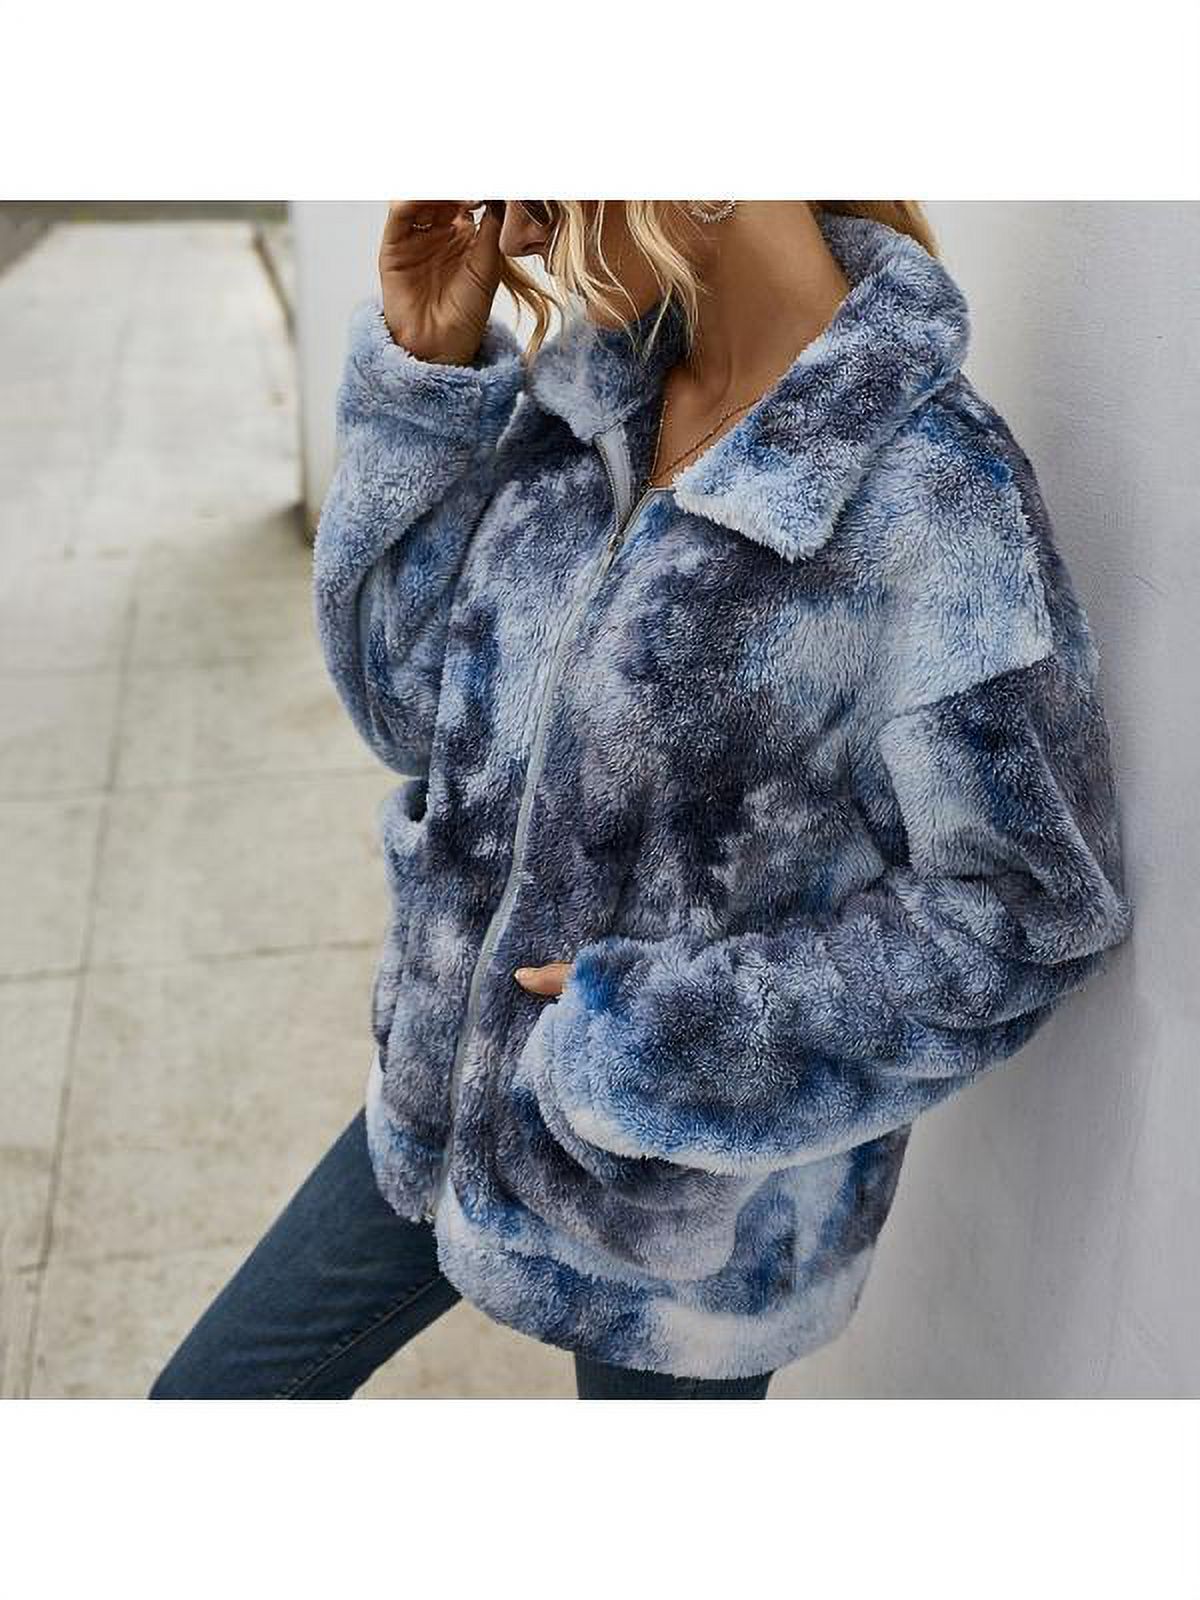 Luxsea Women Autumn Casual Ladies Fashion Tie Dye Jacket With Pocket Daily Coats - image 3 of 7